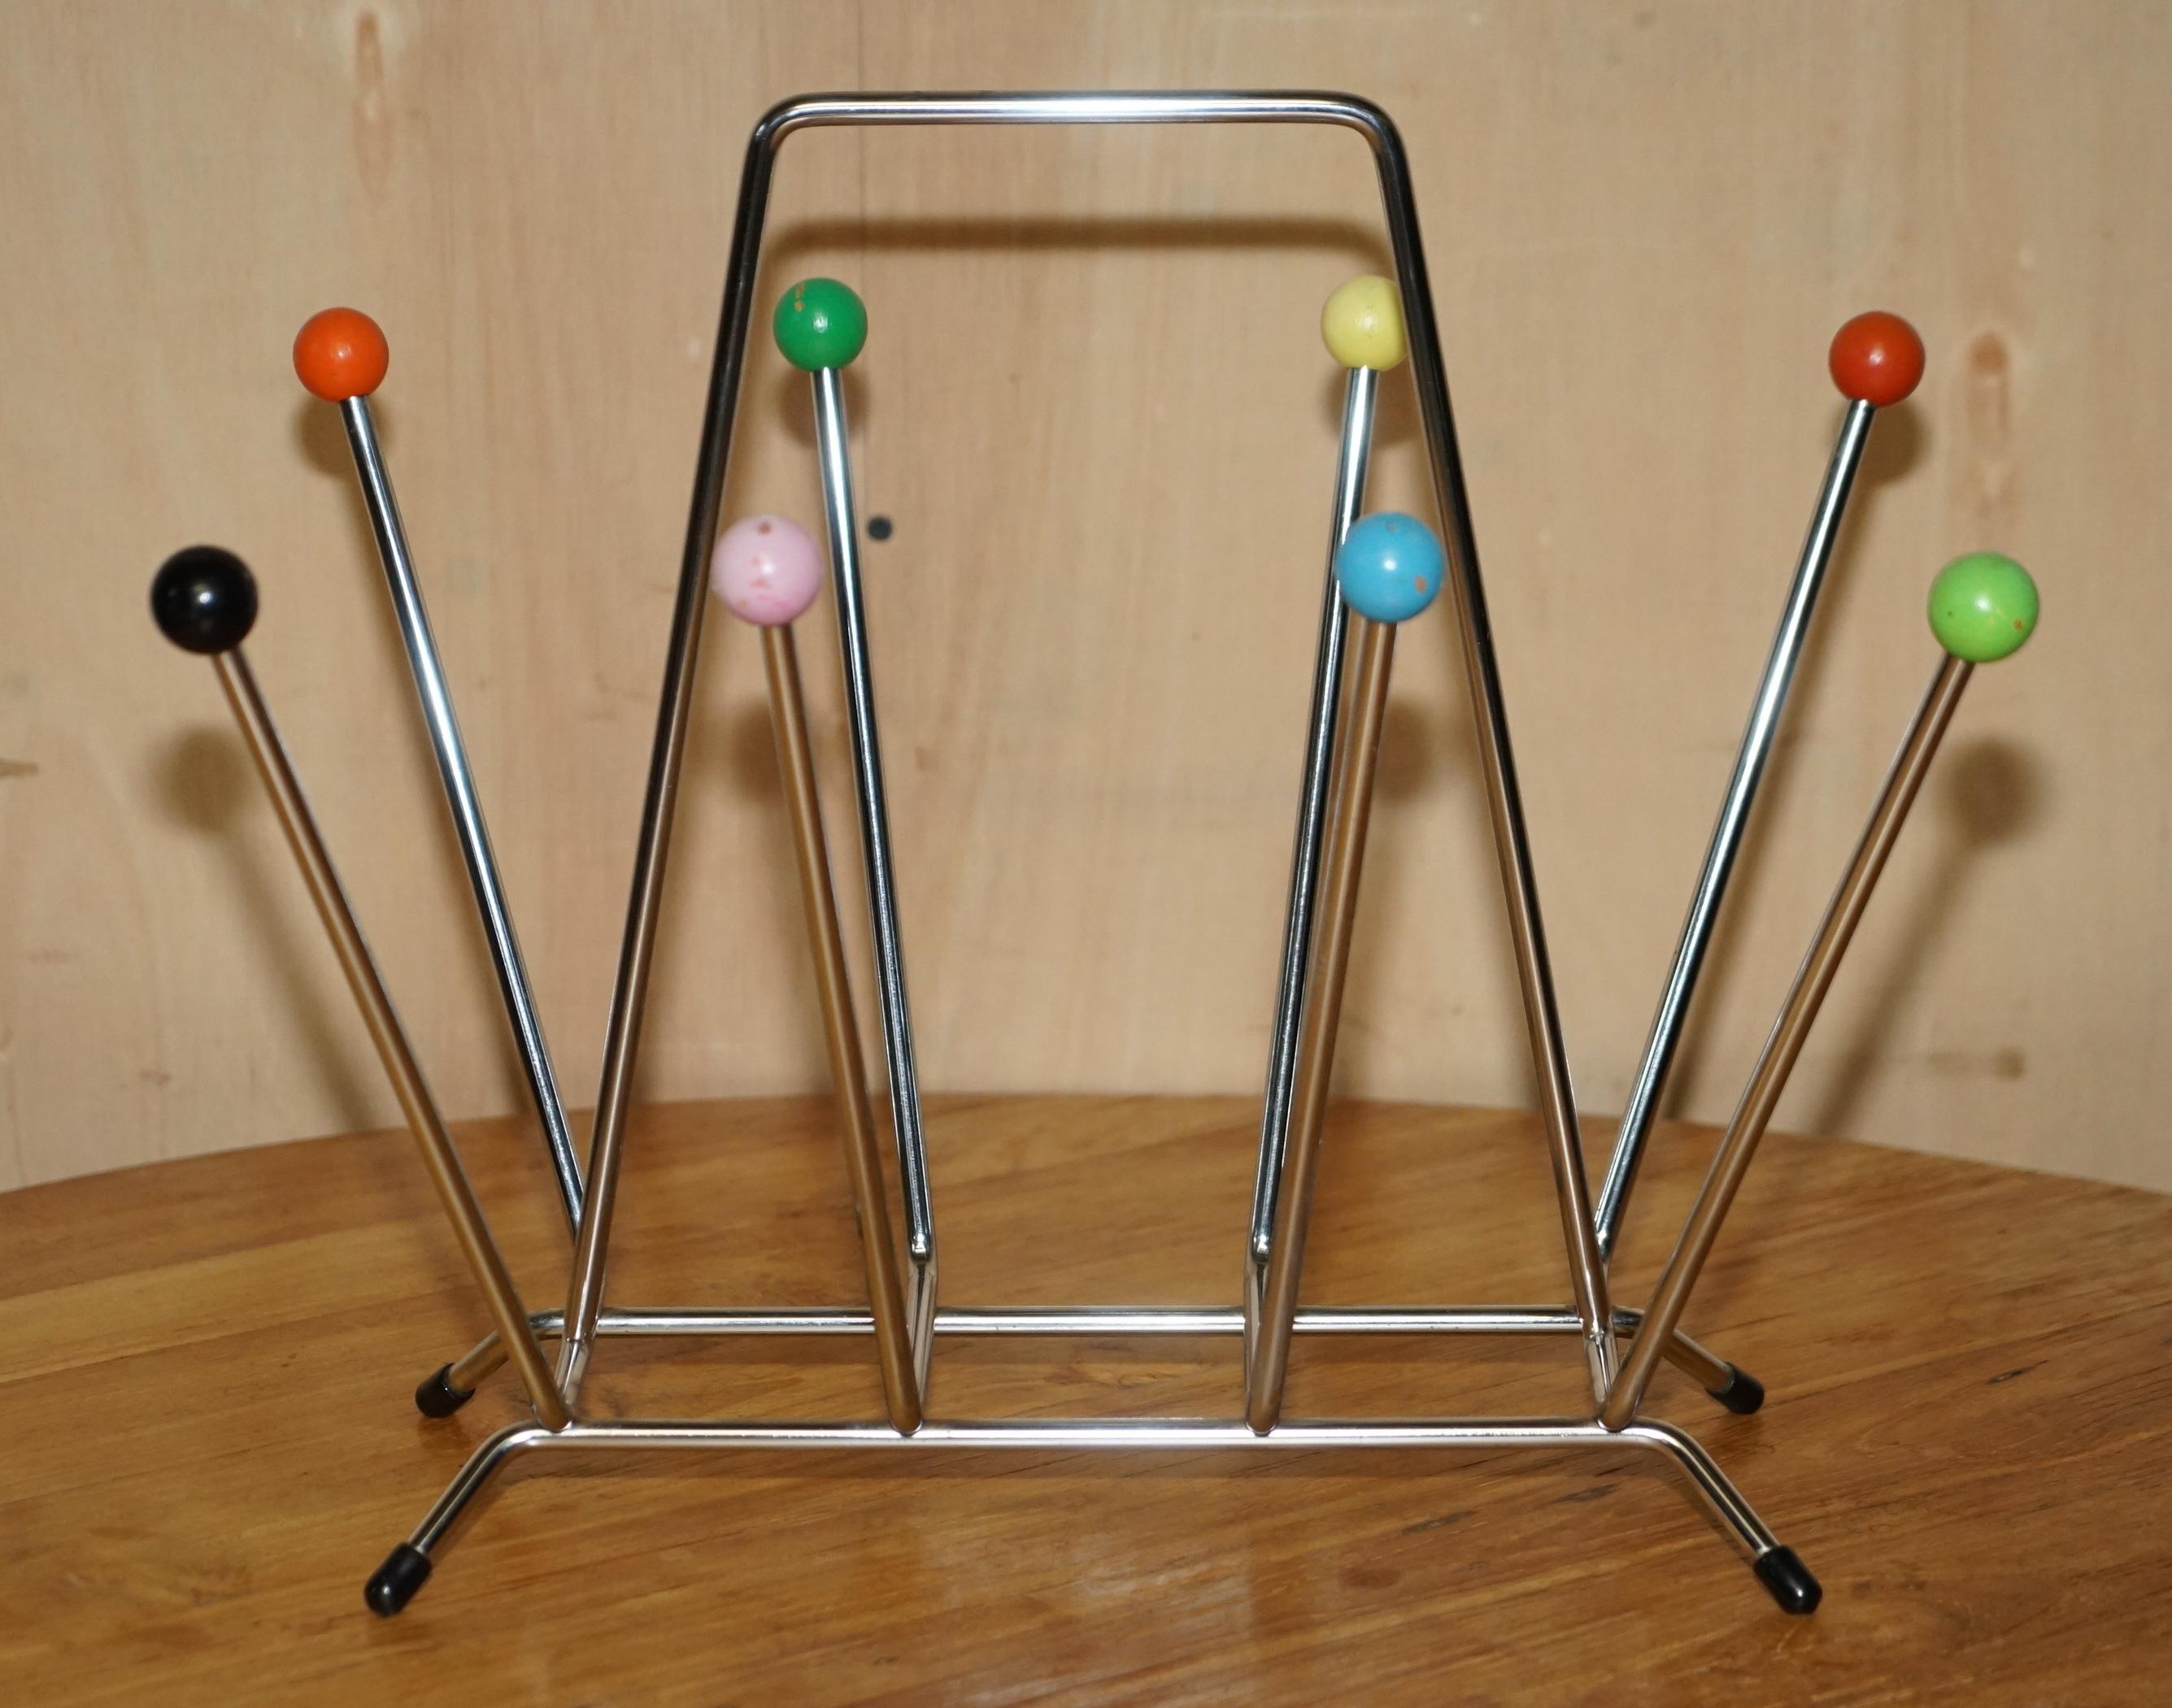 Royal House Antiques

Royal House Antiques is delighted to offer for sale this lovely original circa 1960's Vitra Eames Sputnik Atomic space race magazine rack

A highly decorative, well made and collectable piece that looks amazing from every